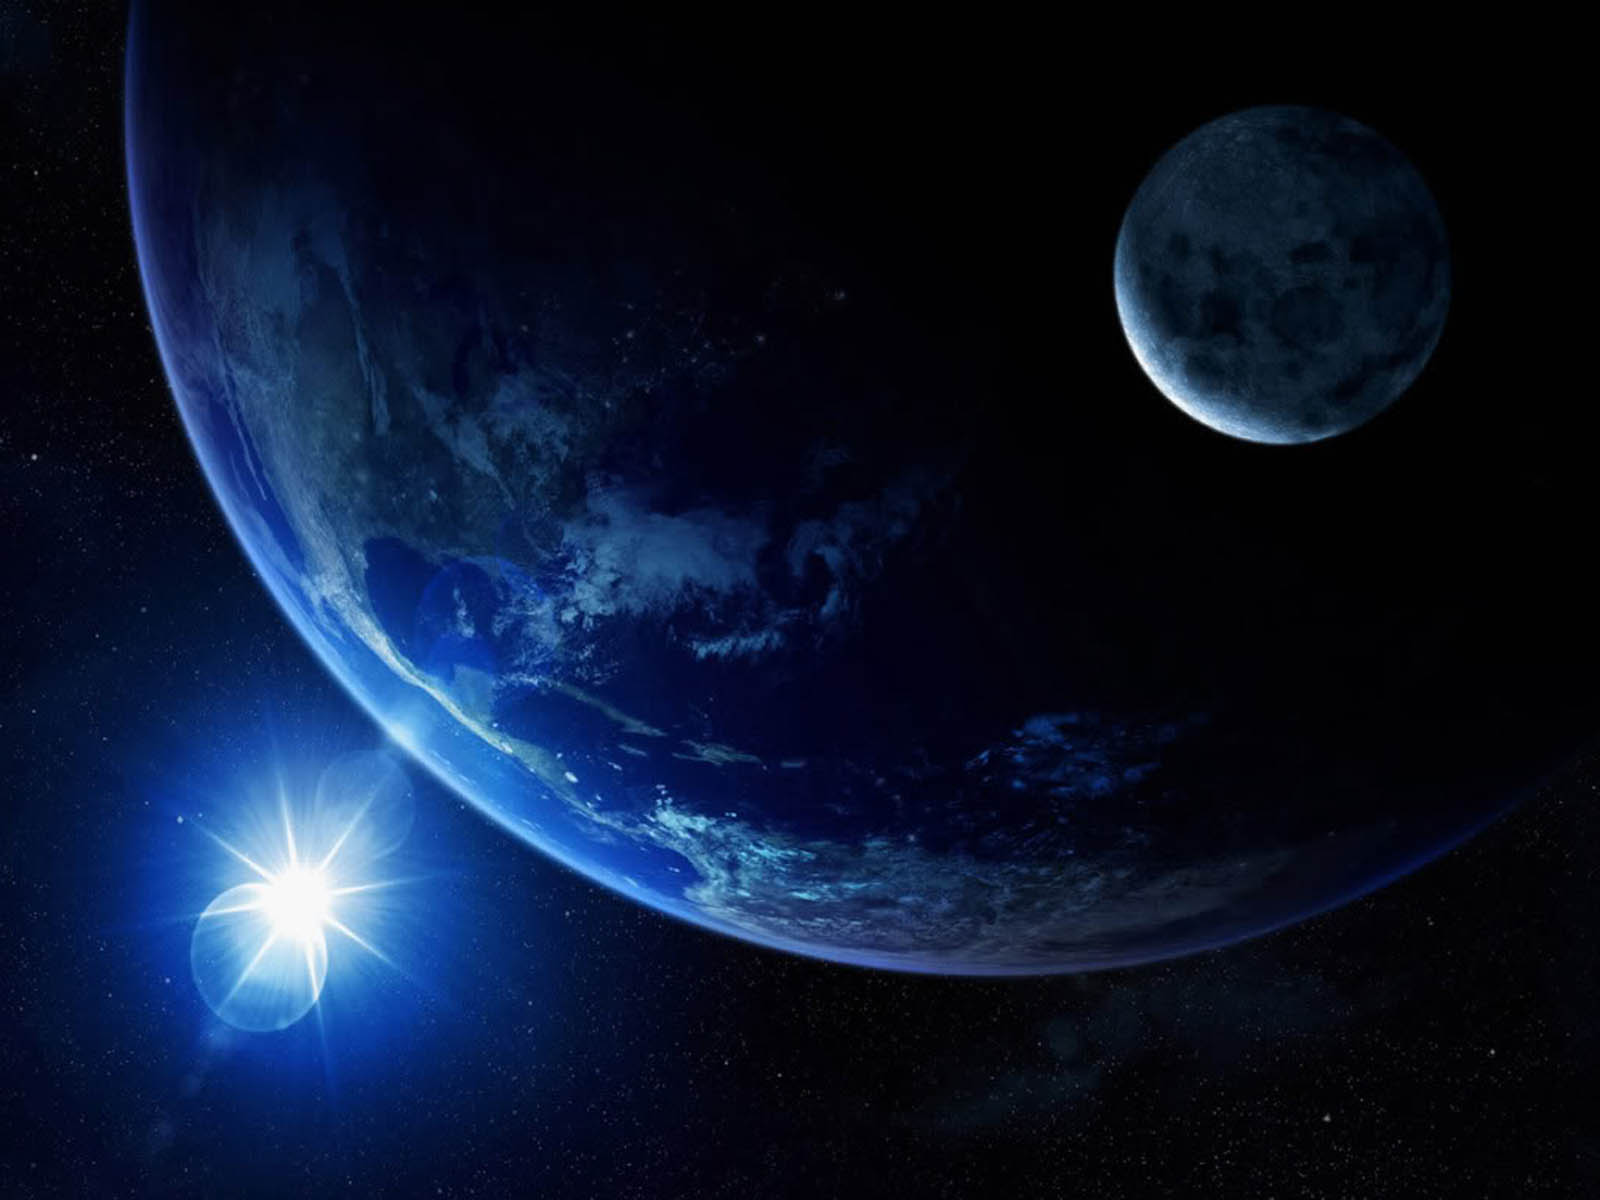 Wallpaper Earth And Moon